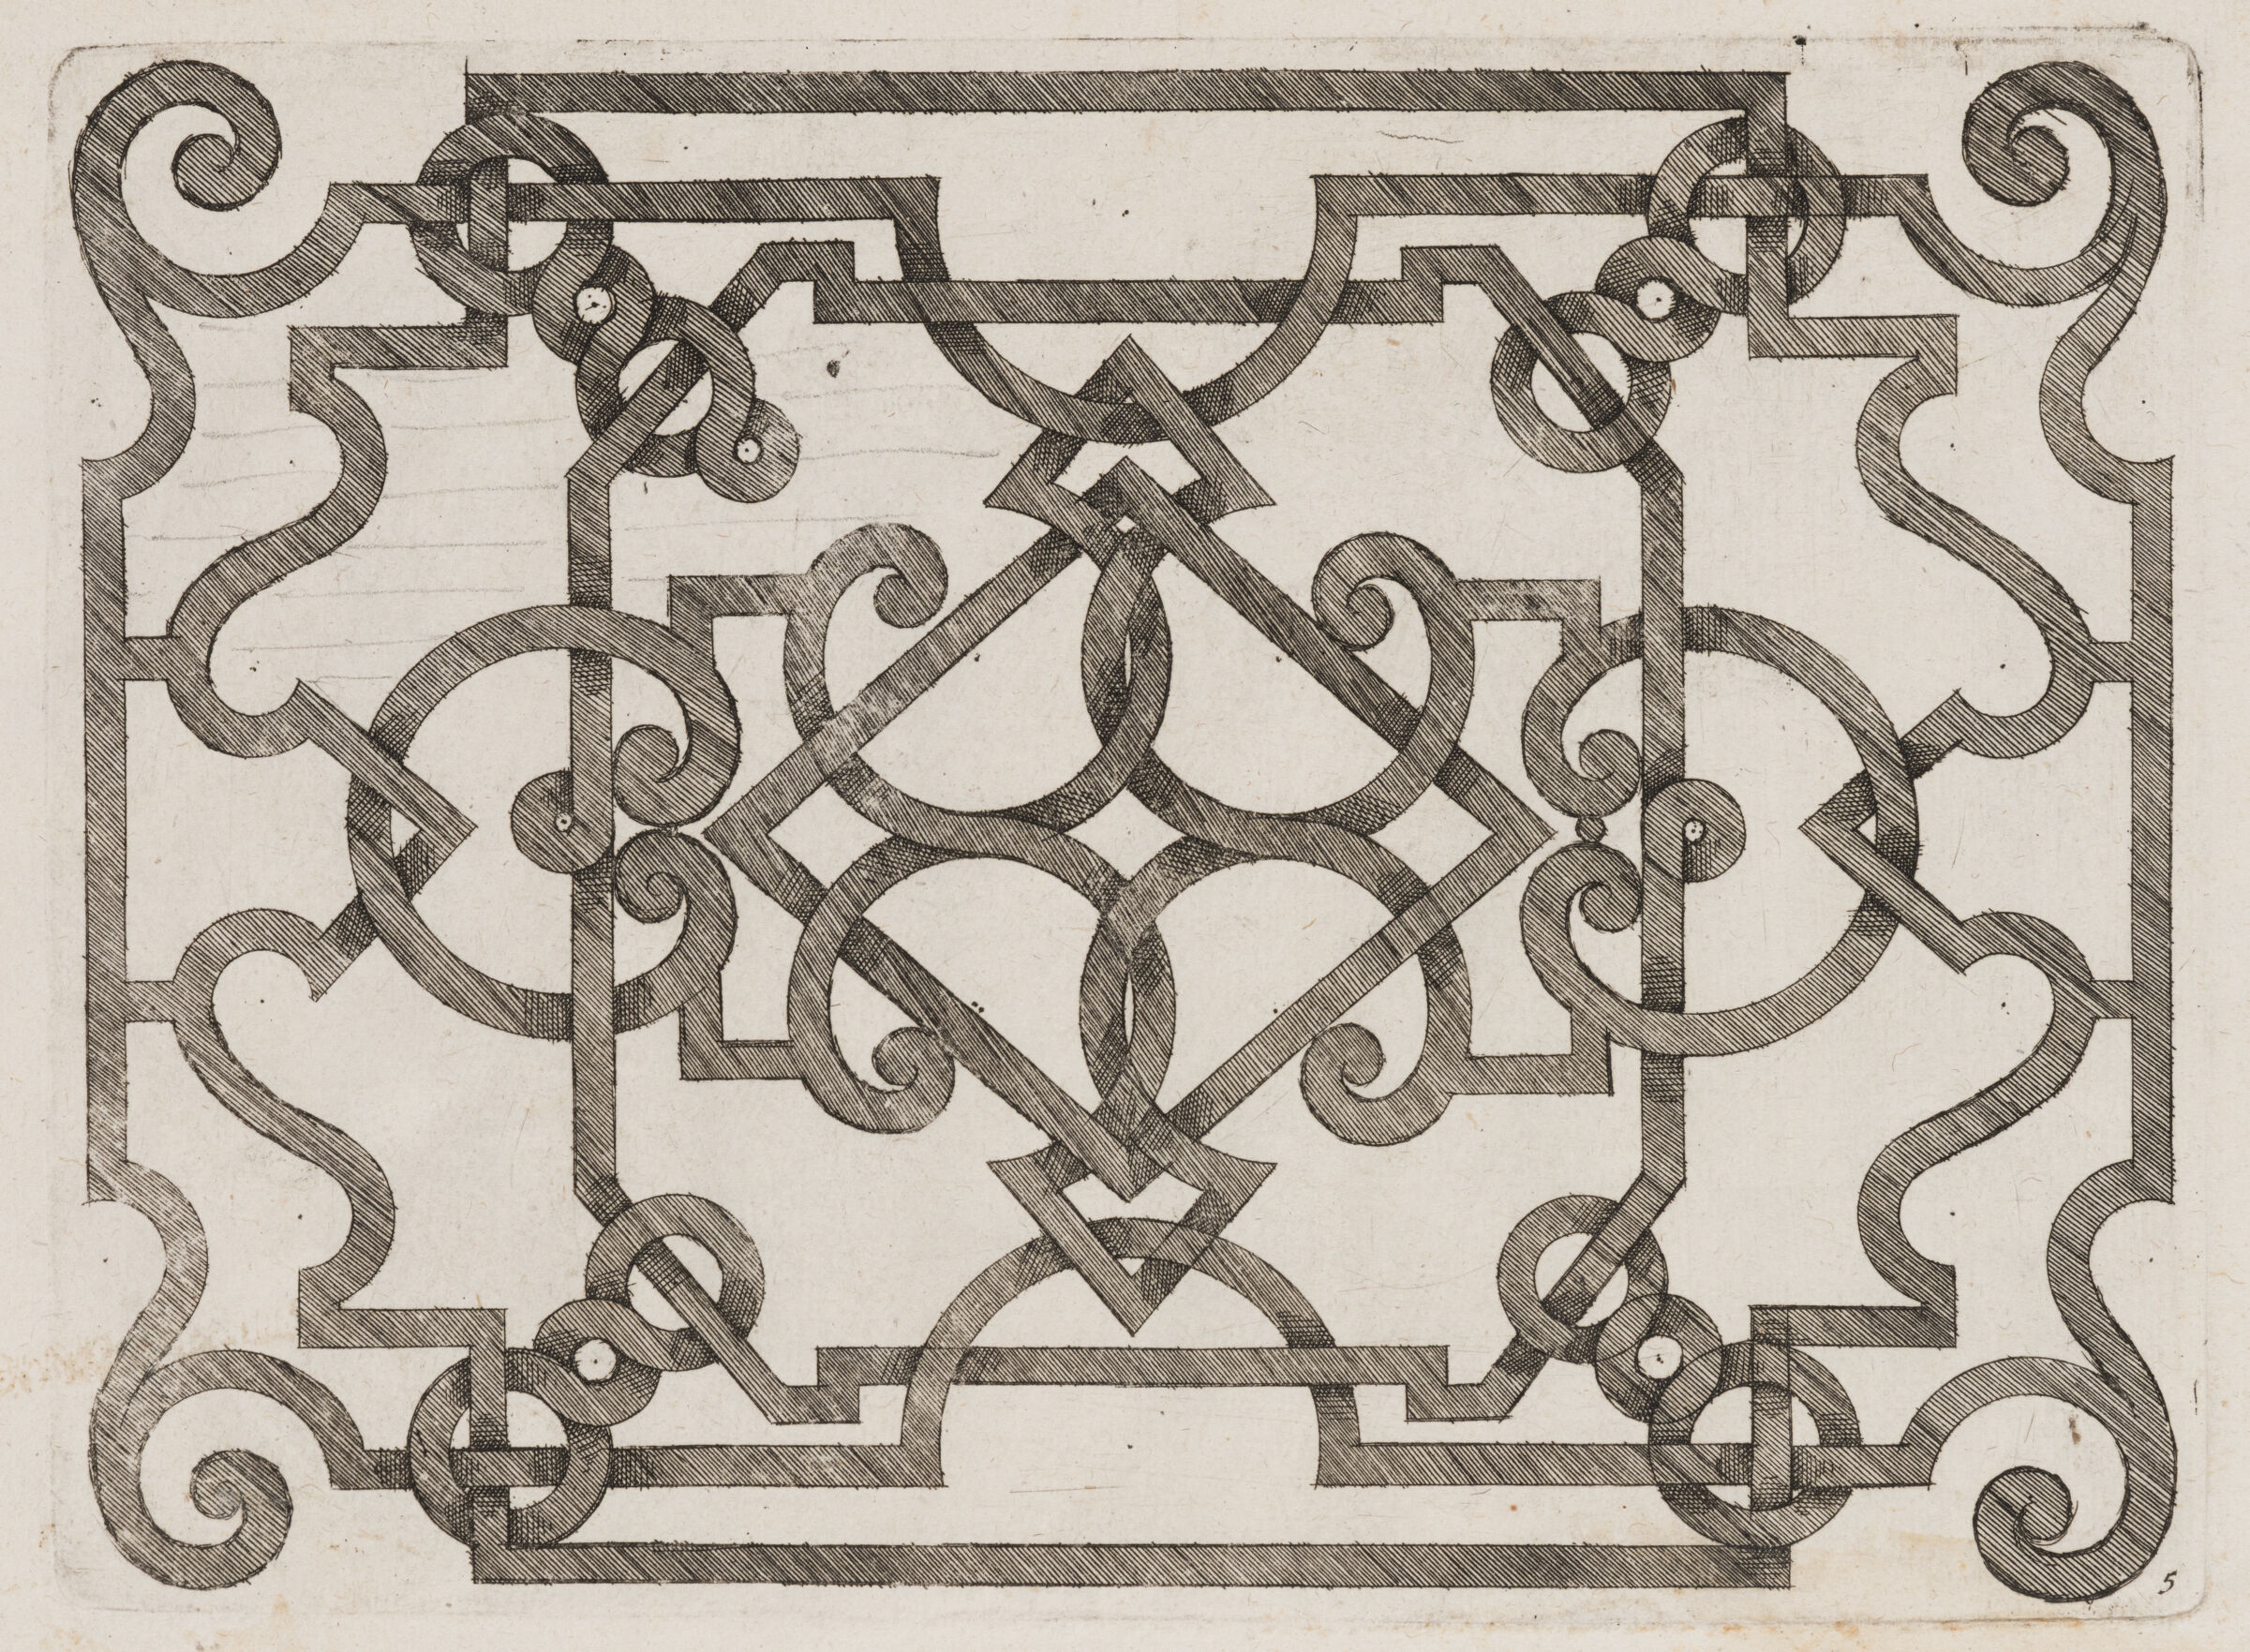 Interlace With Scrolls At Corners, Centered By A Horizontal Lozenge